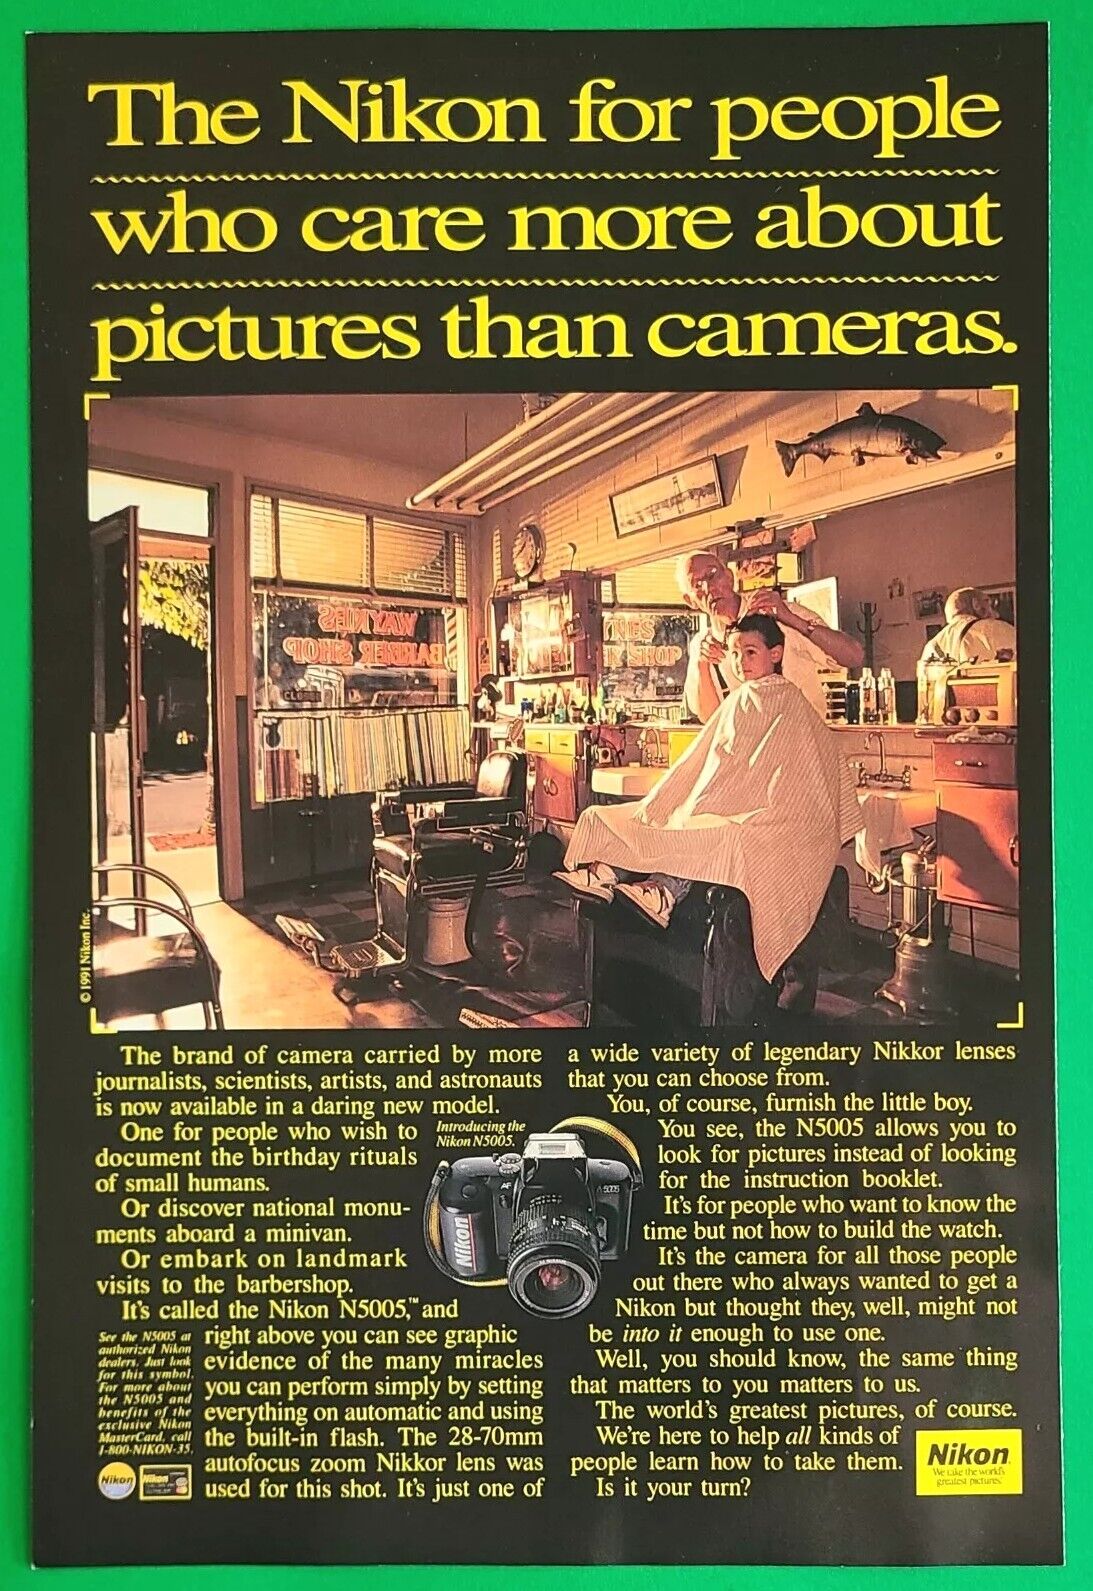 1992 Nikon Camera Print Ad for people who care more about pictures than cameras